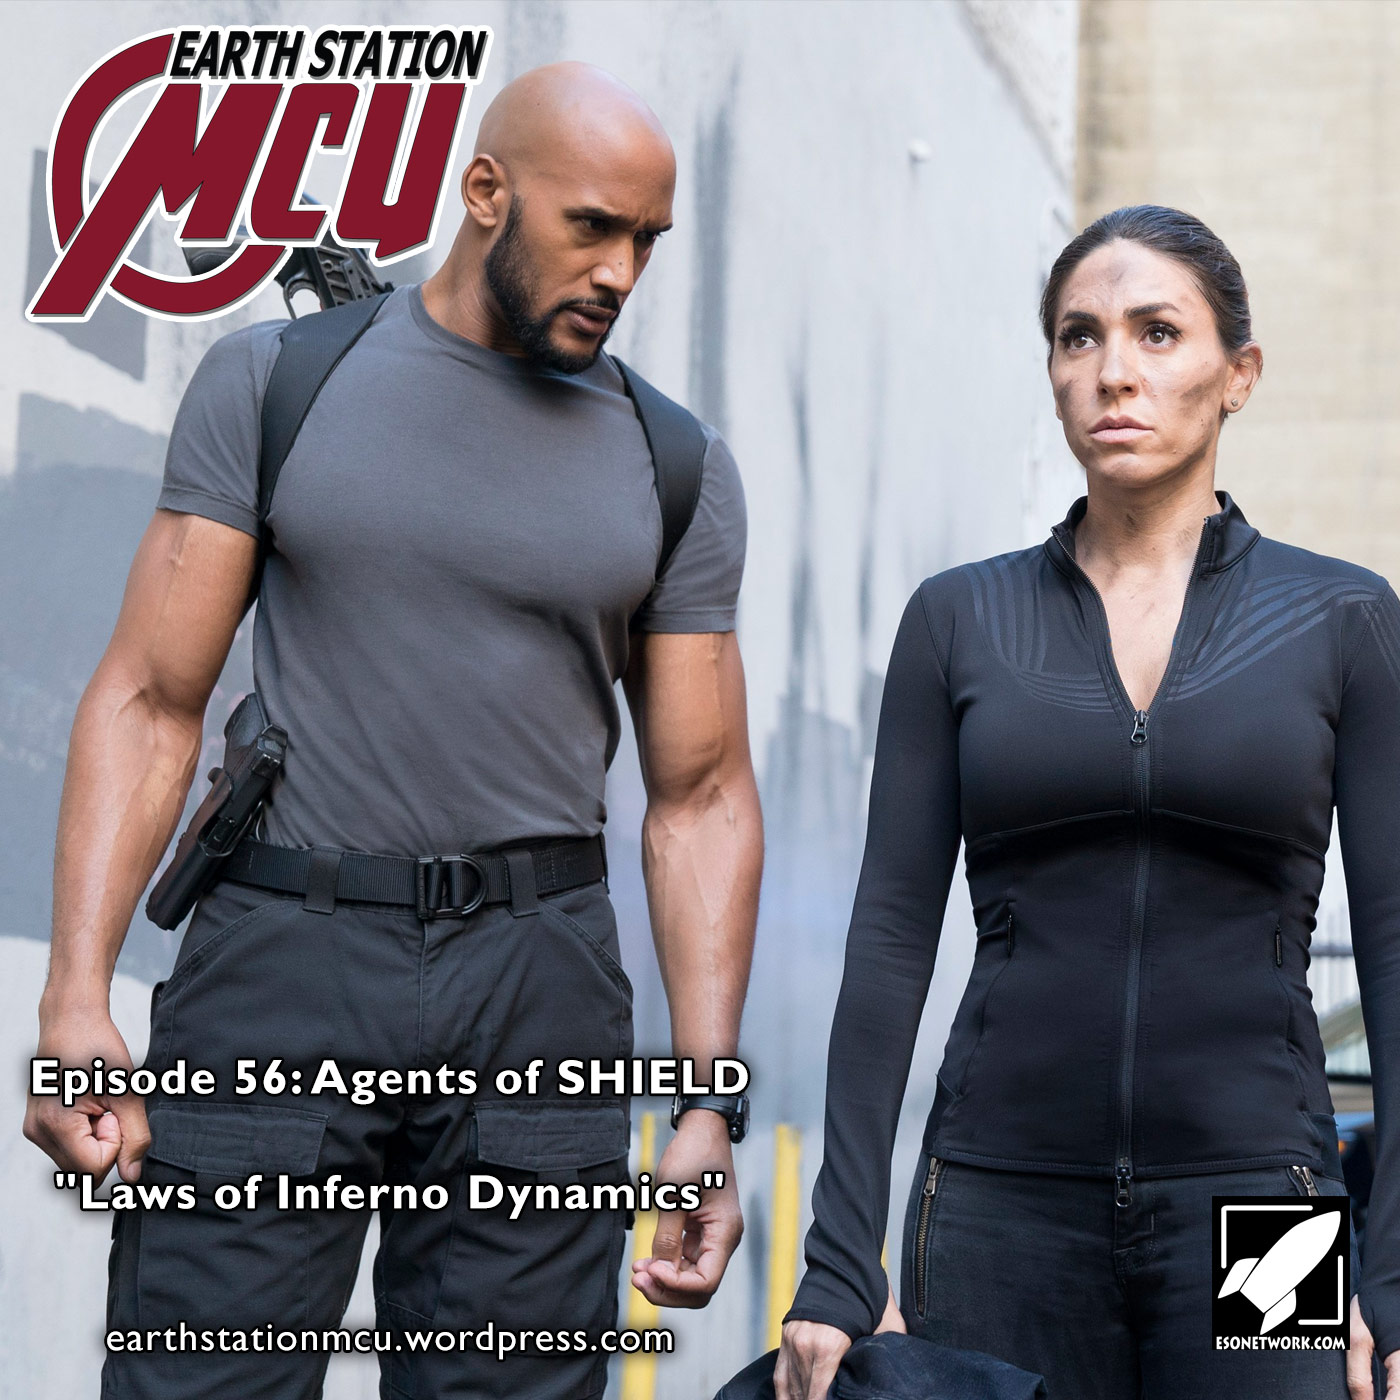 Earth Station MCU Episode 56: Agents of SHIELD ”Laws of Inferno Dynamics”